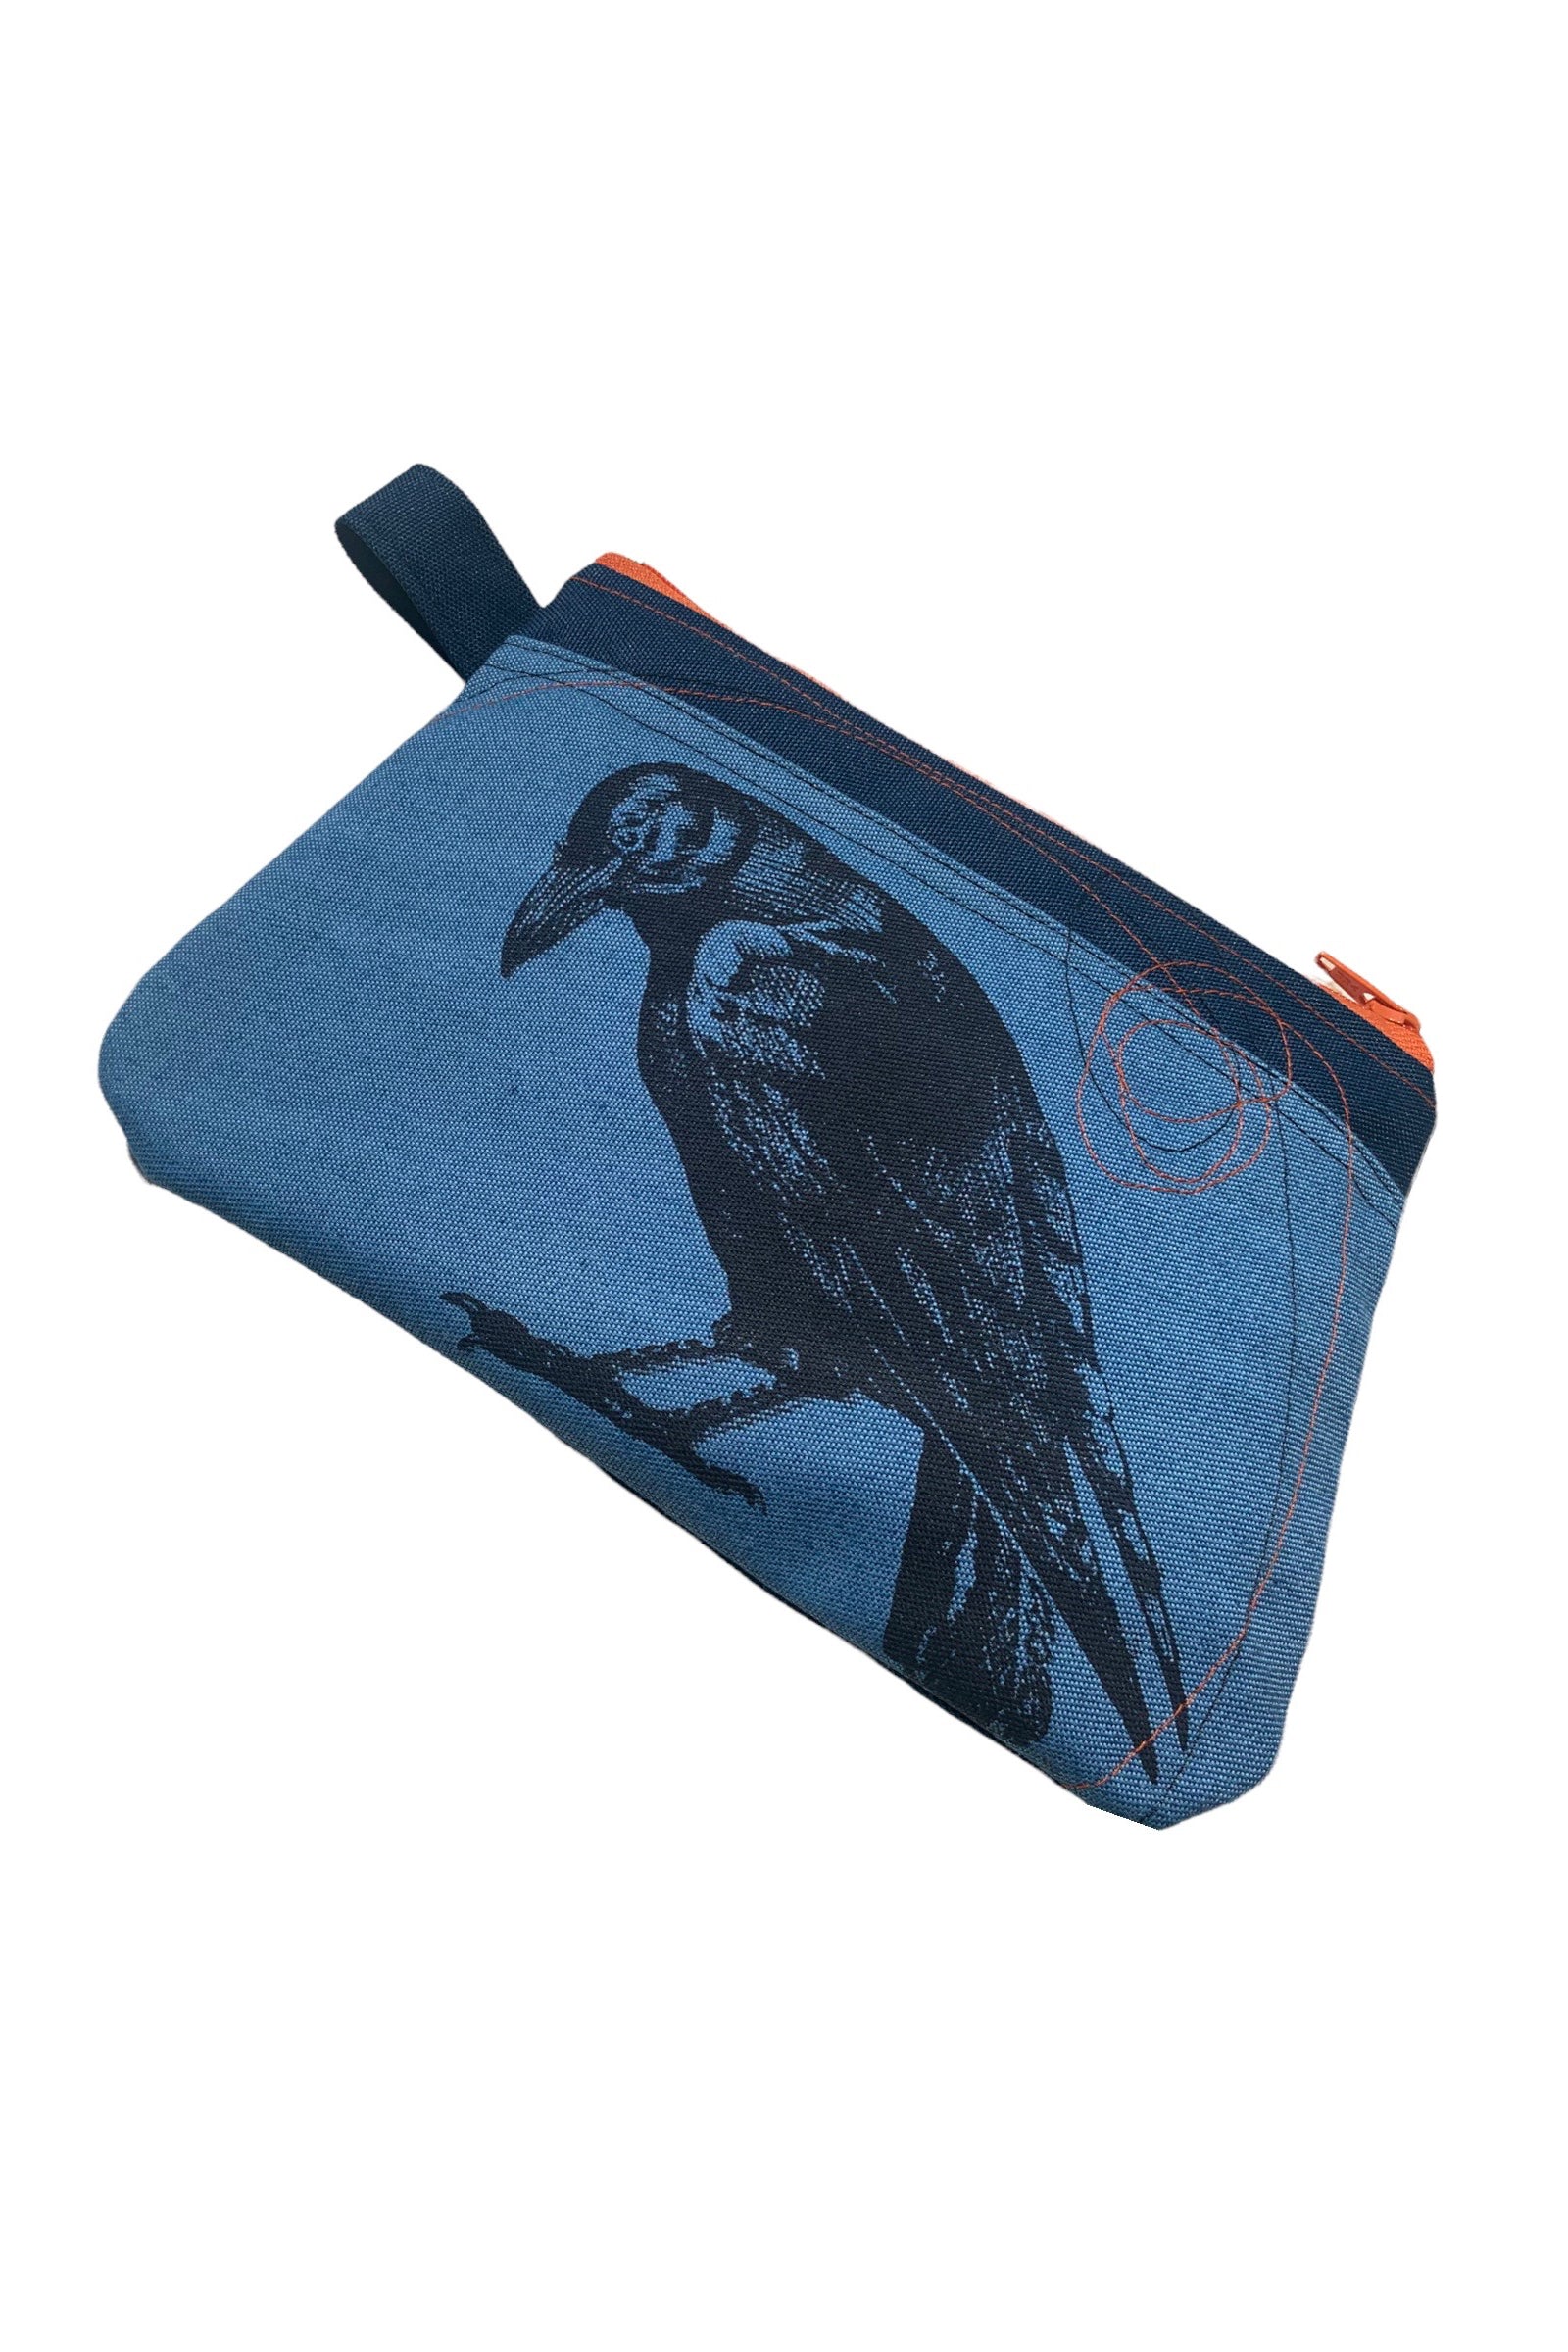 Cynthia DM water resistant pouch - Many colour options